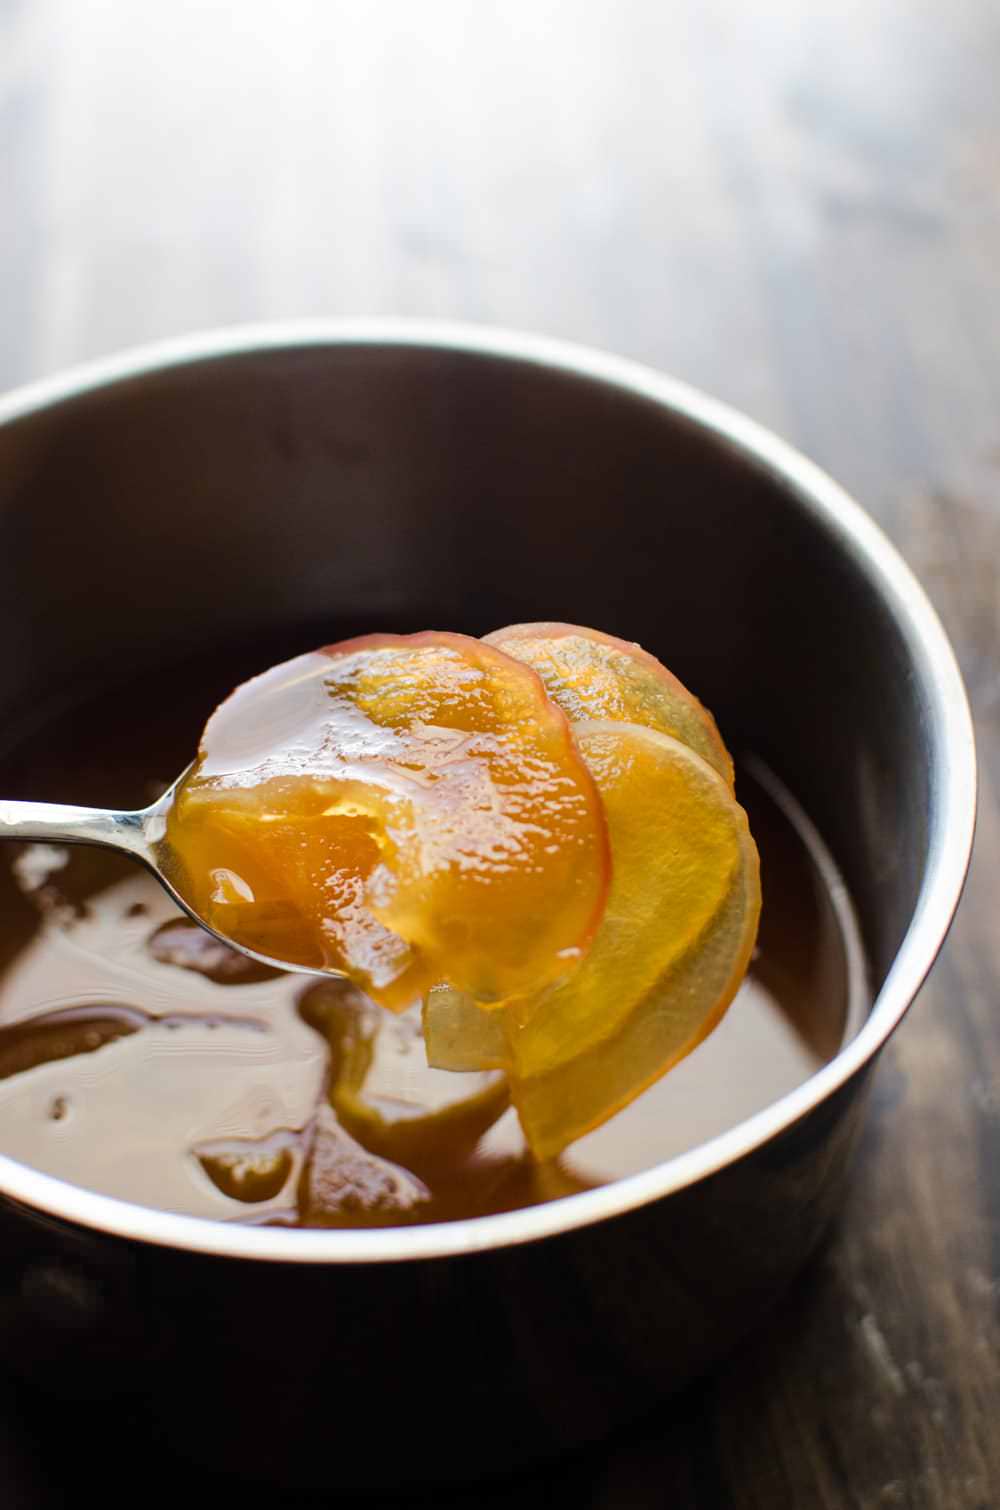 Poached Apple and Cinnamon Creme Caramel (Poached Apple and Cinnamon Flan) - A decadent, creamy dessert. Easy to make, and a perfect make ahead dessert! A delicious twist on the classic Creme Caramel with Americas favourite Apple and Cinnamon